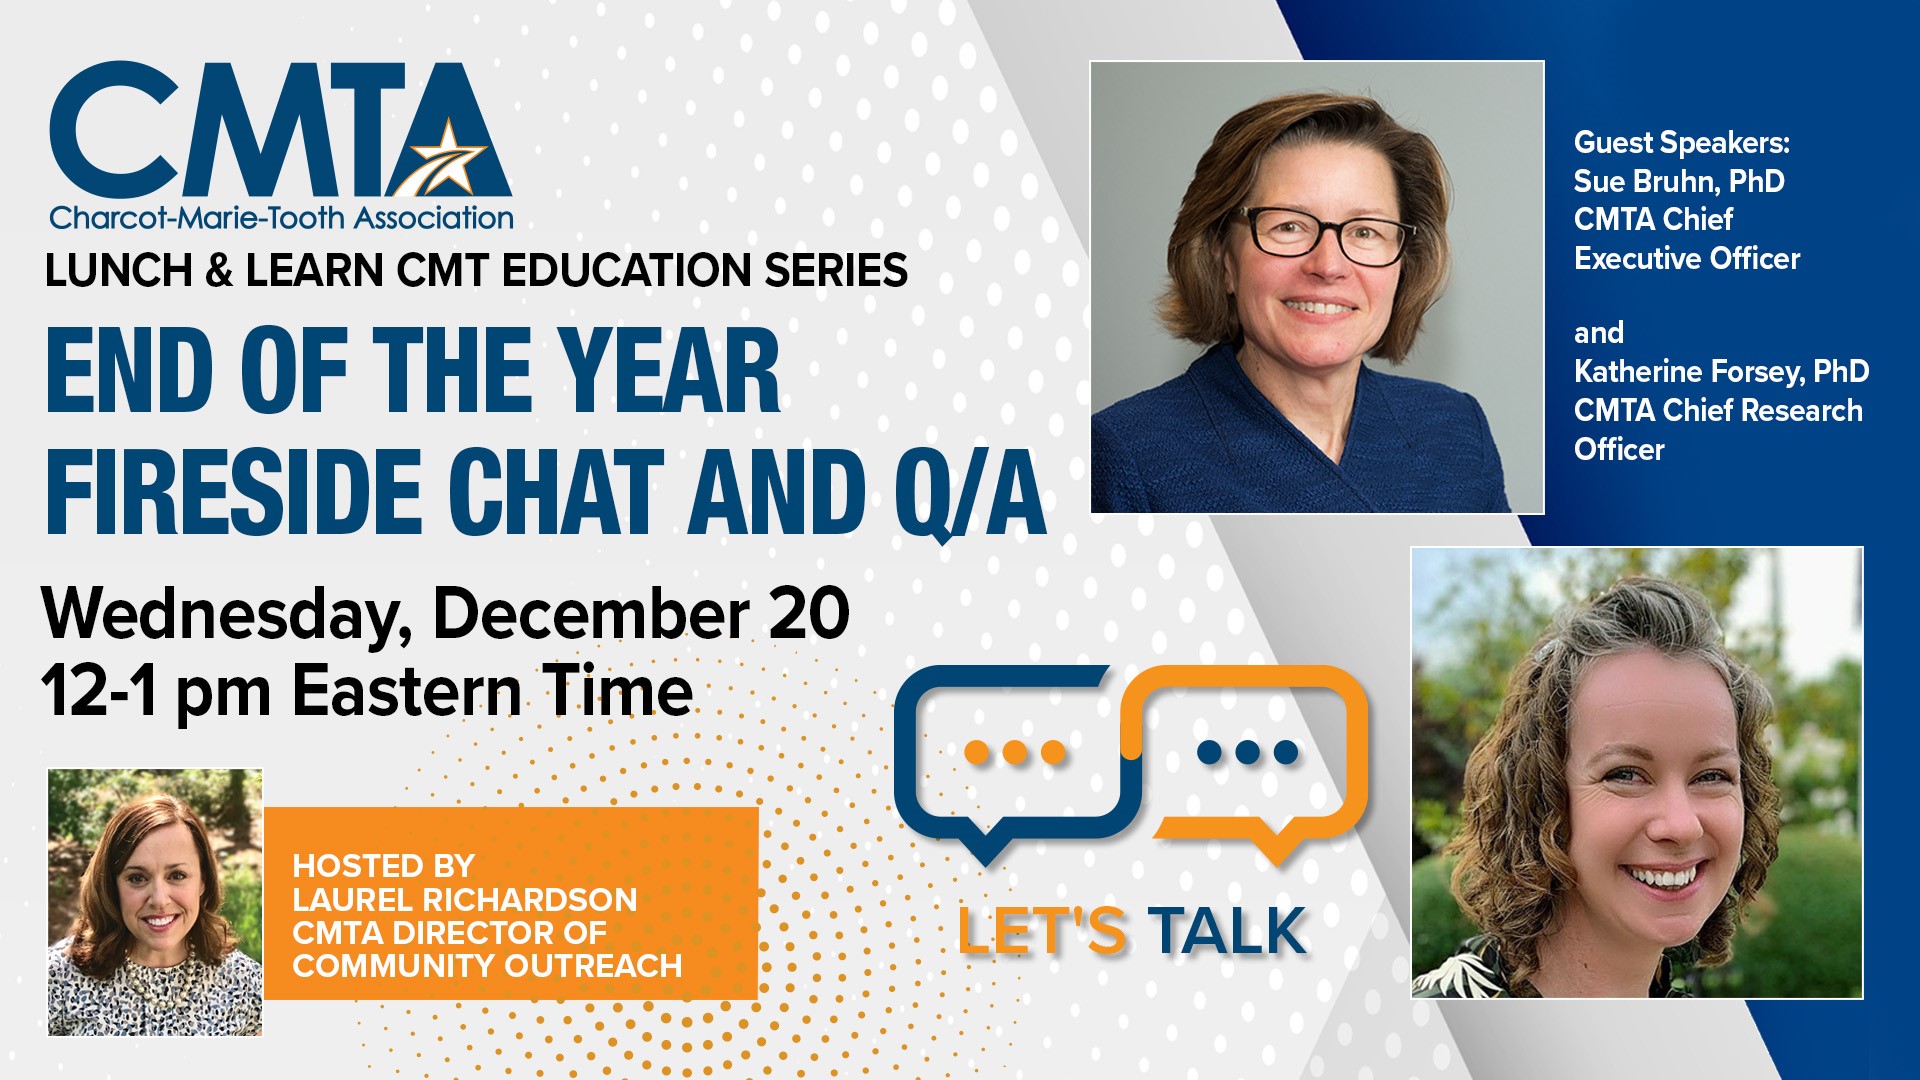 CMTA Lunch & Learn: End of the Year Fireside Chat and Q/A